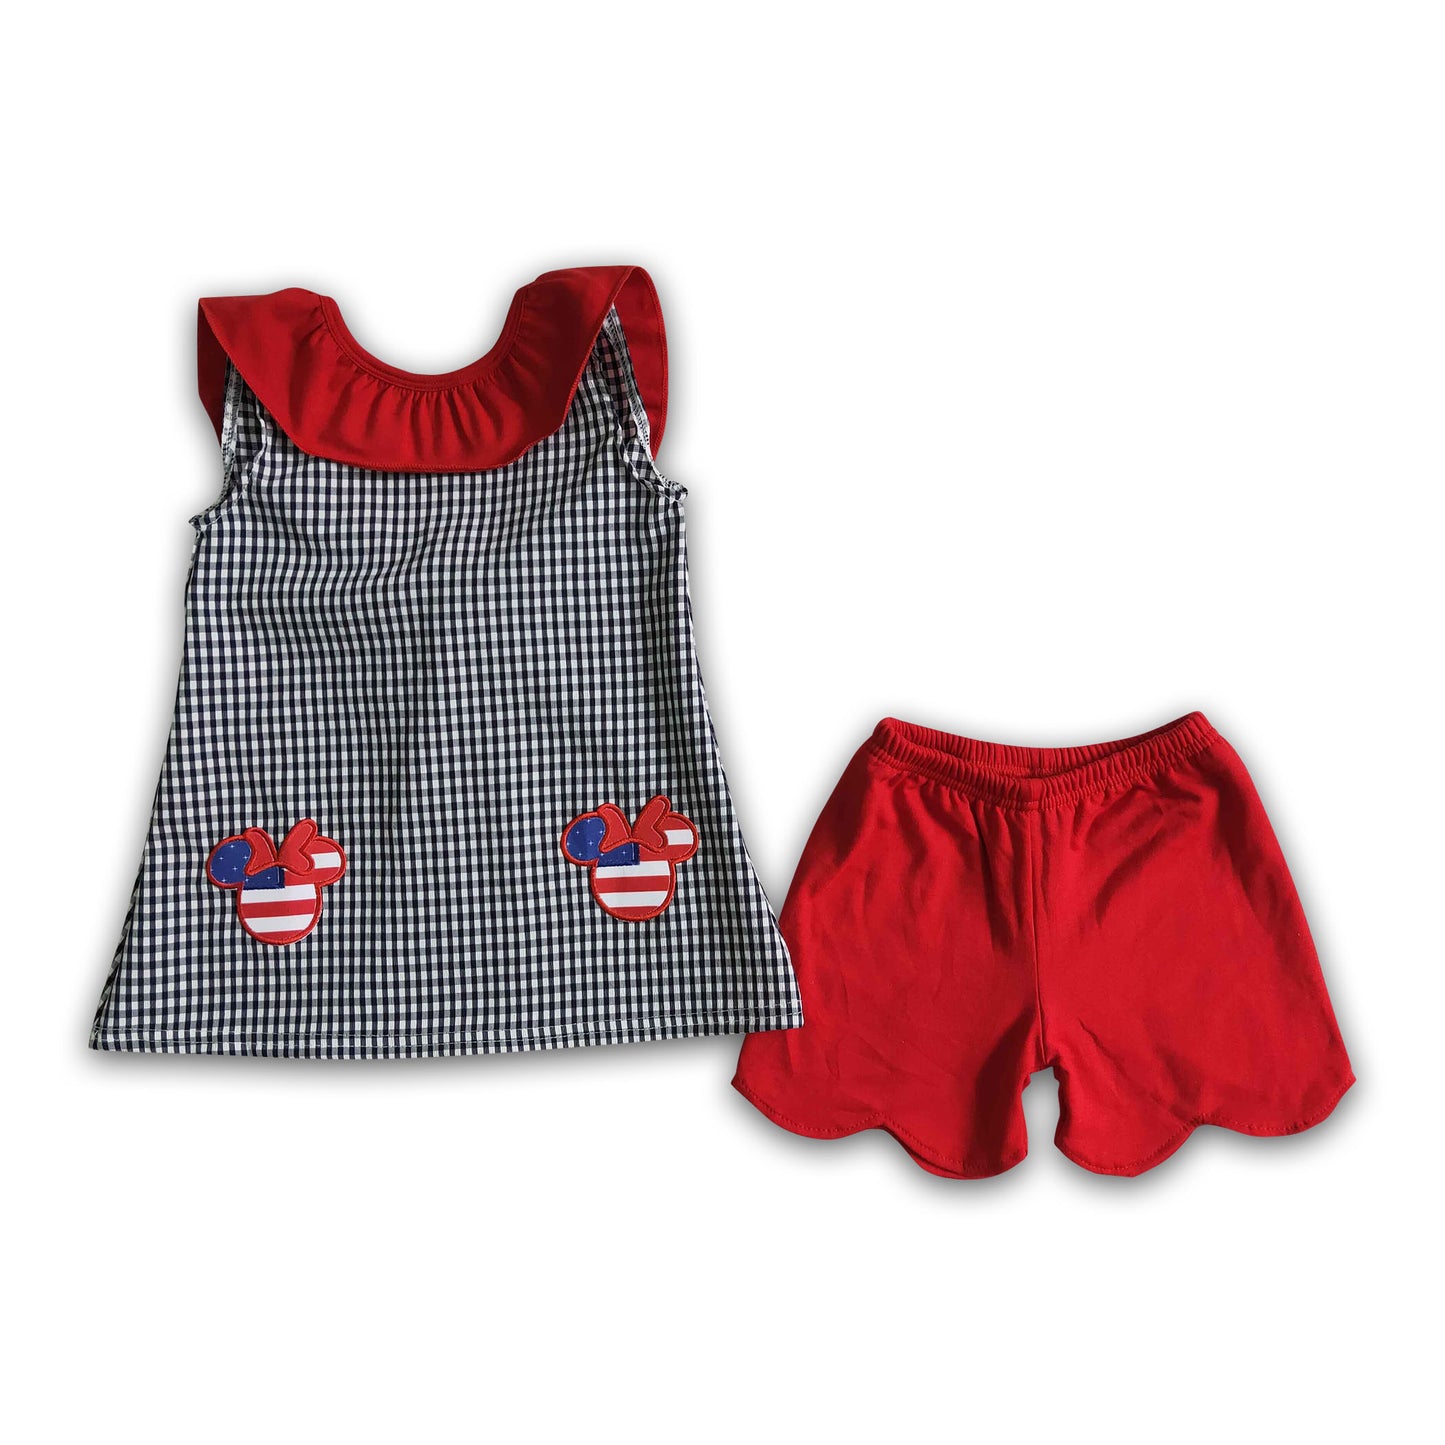 Woven plaid embroidery red shorts girls 4th of july clothing